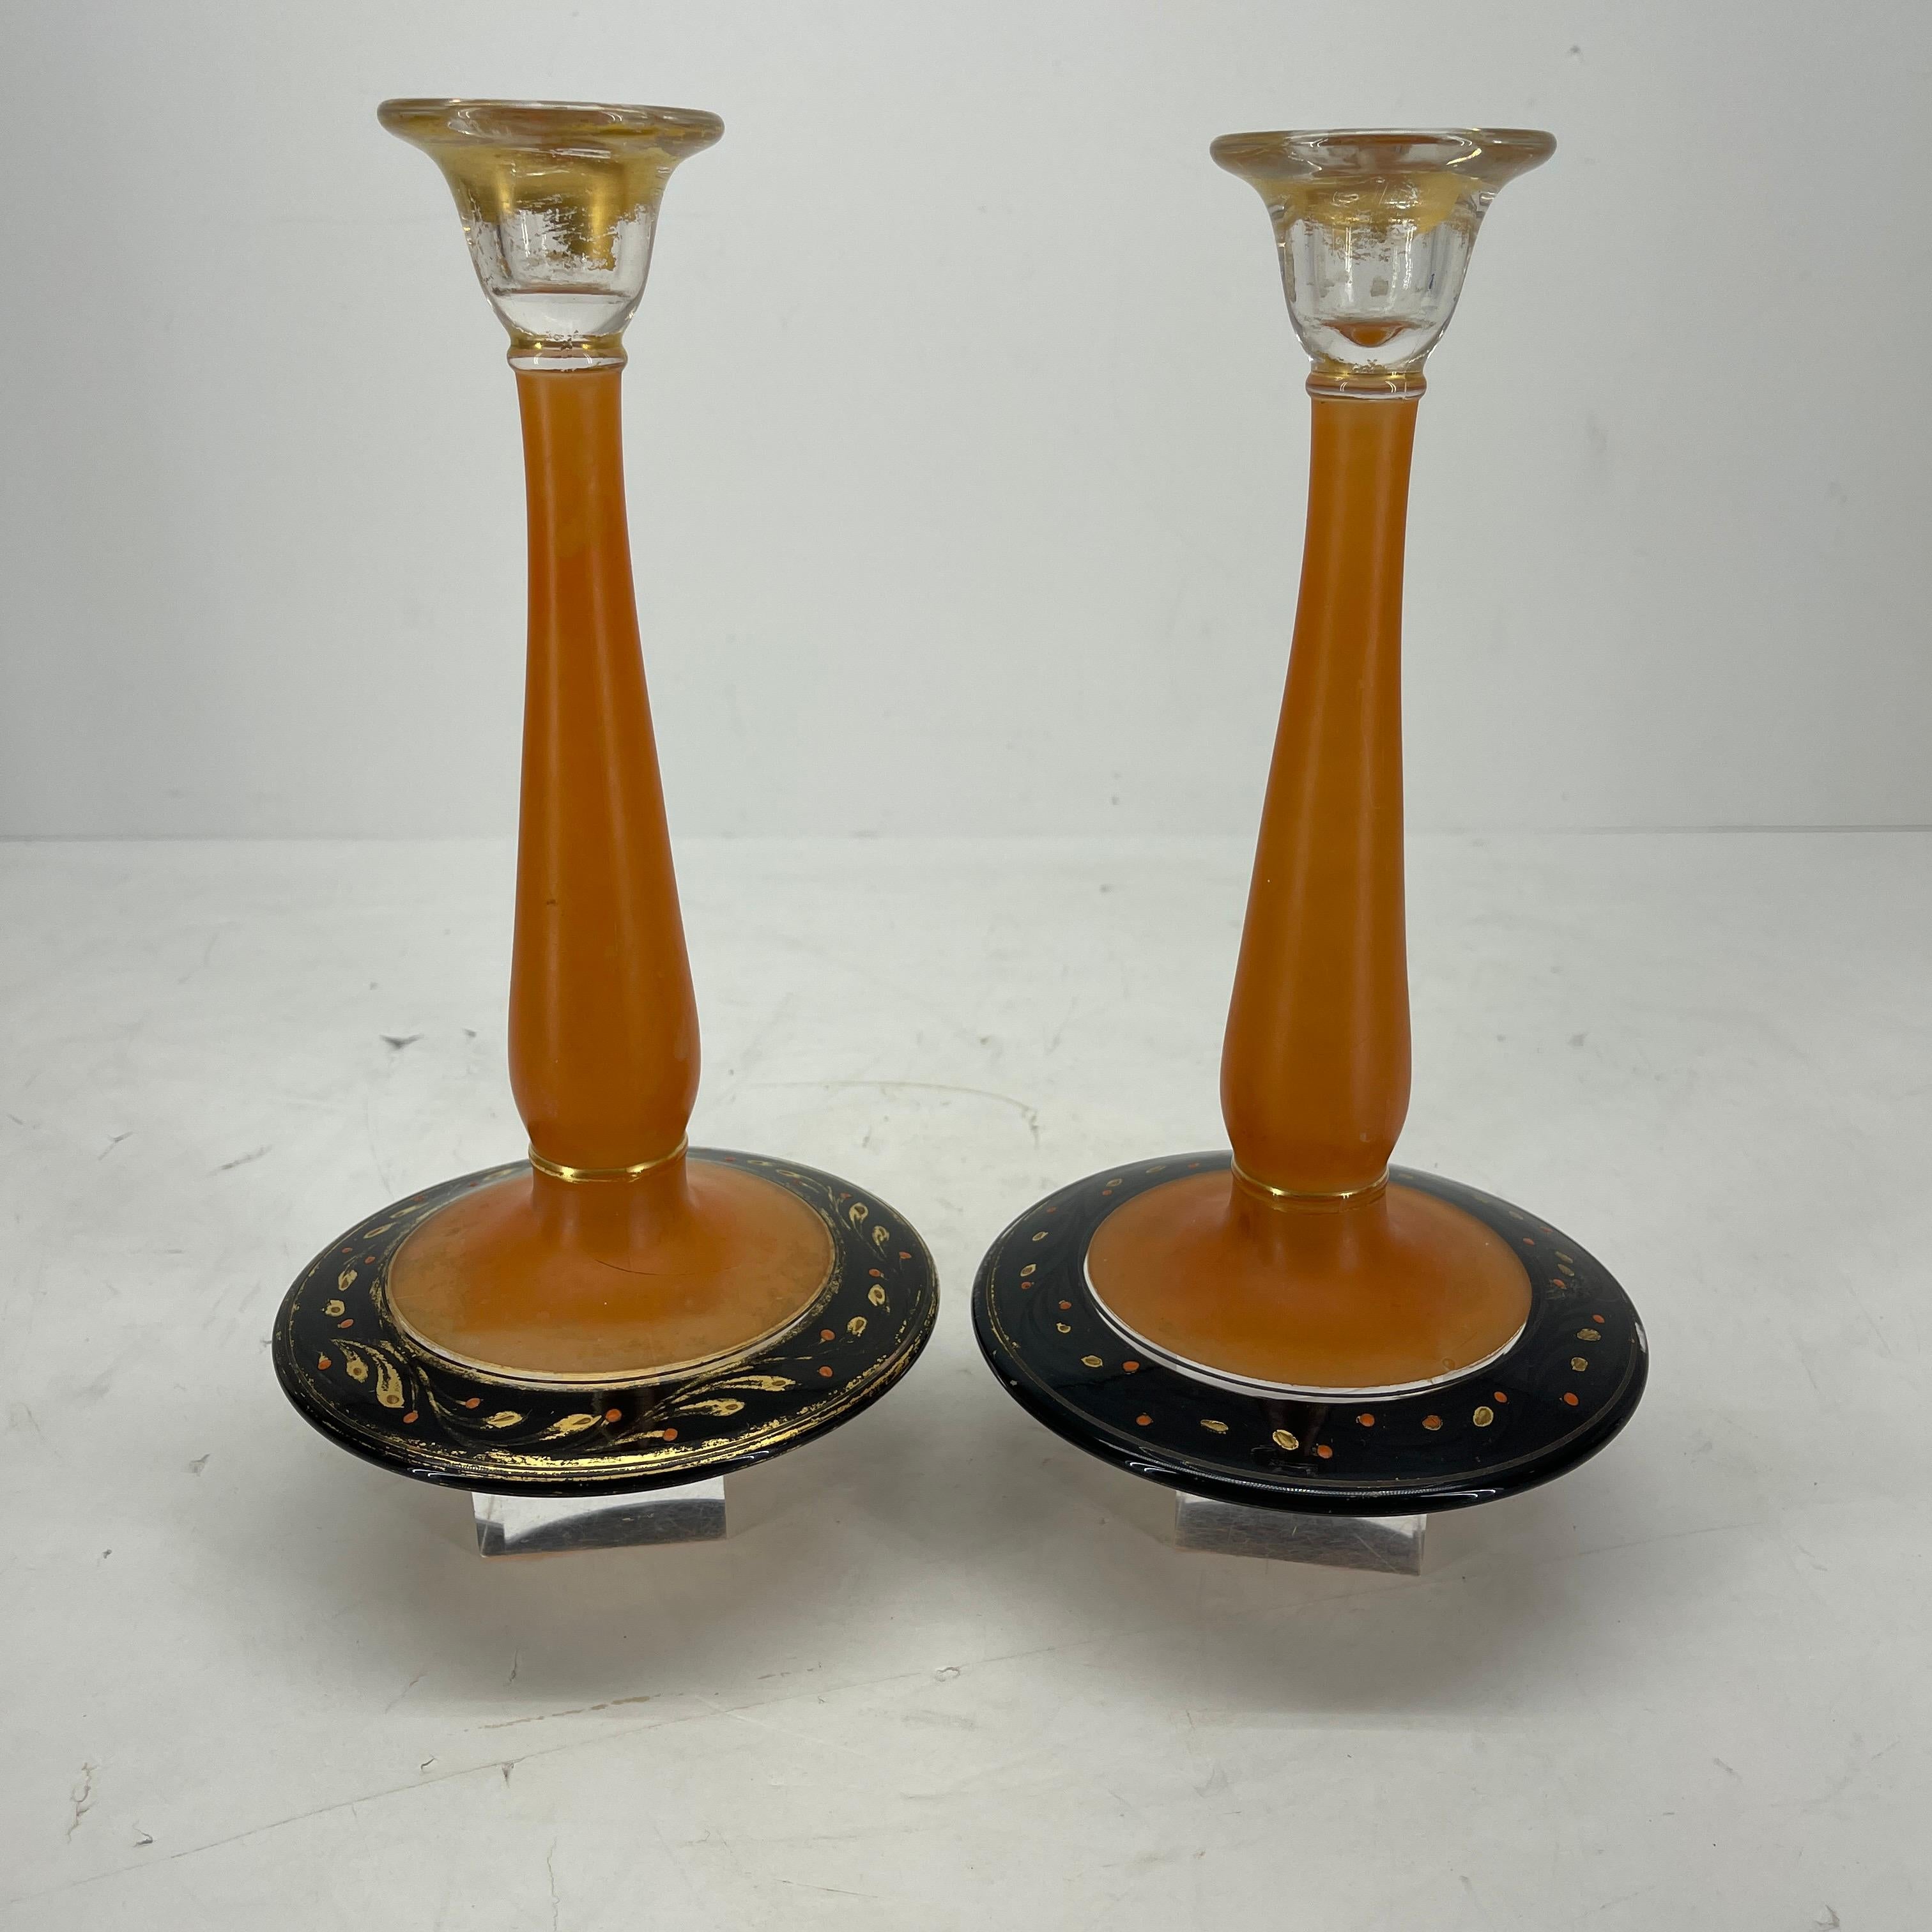 Art Deco orange and black pressed glass candlesticks in the manner of Charles Schneider. The candle holders have a delicate and beautiful etched design on the base and glow in the light. The candle holder bases do not match; each has its individual